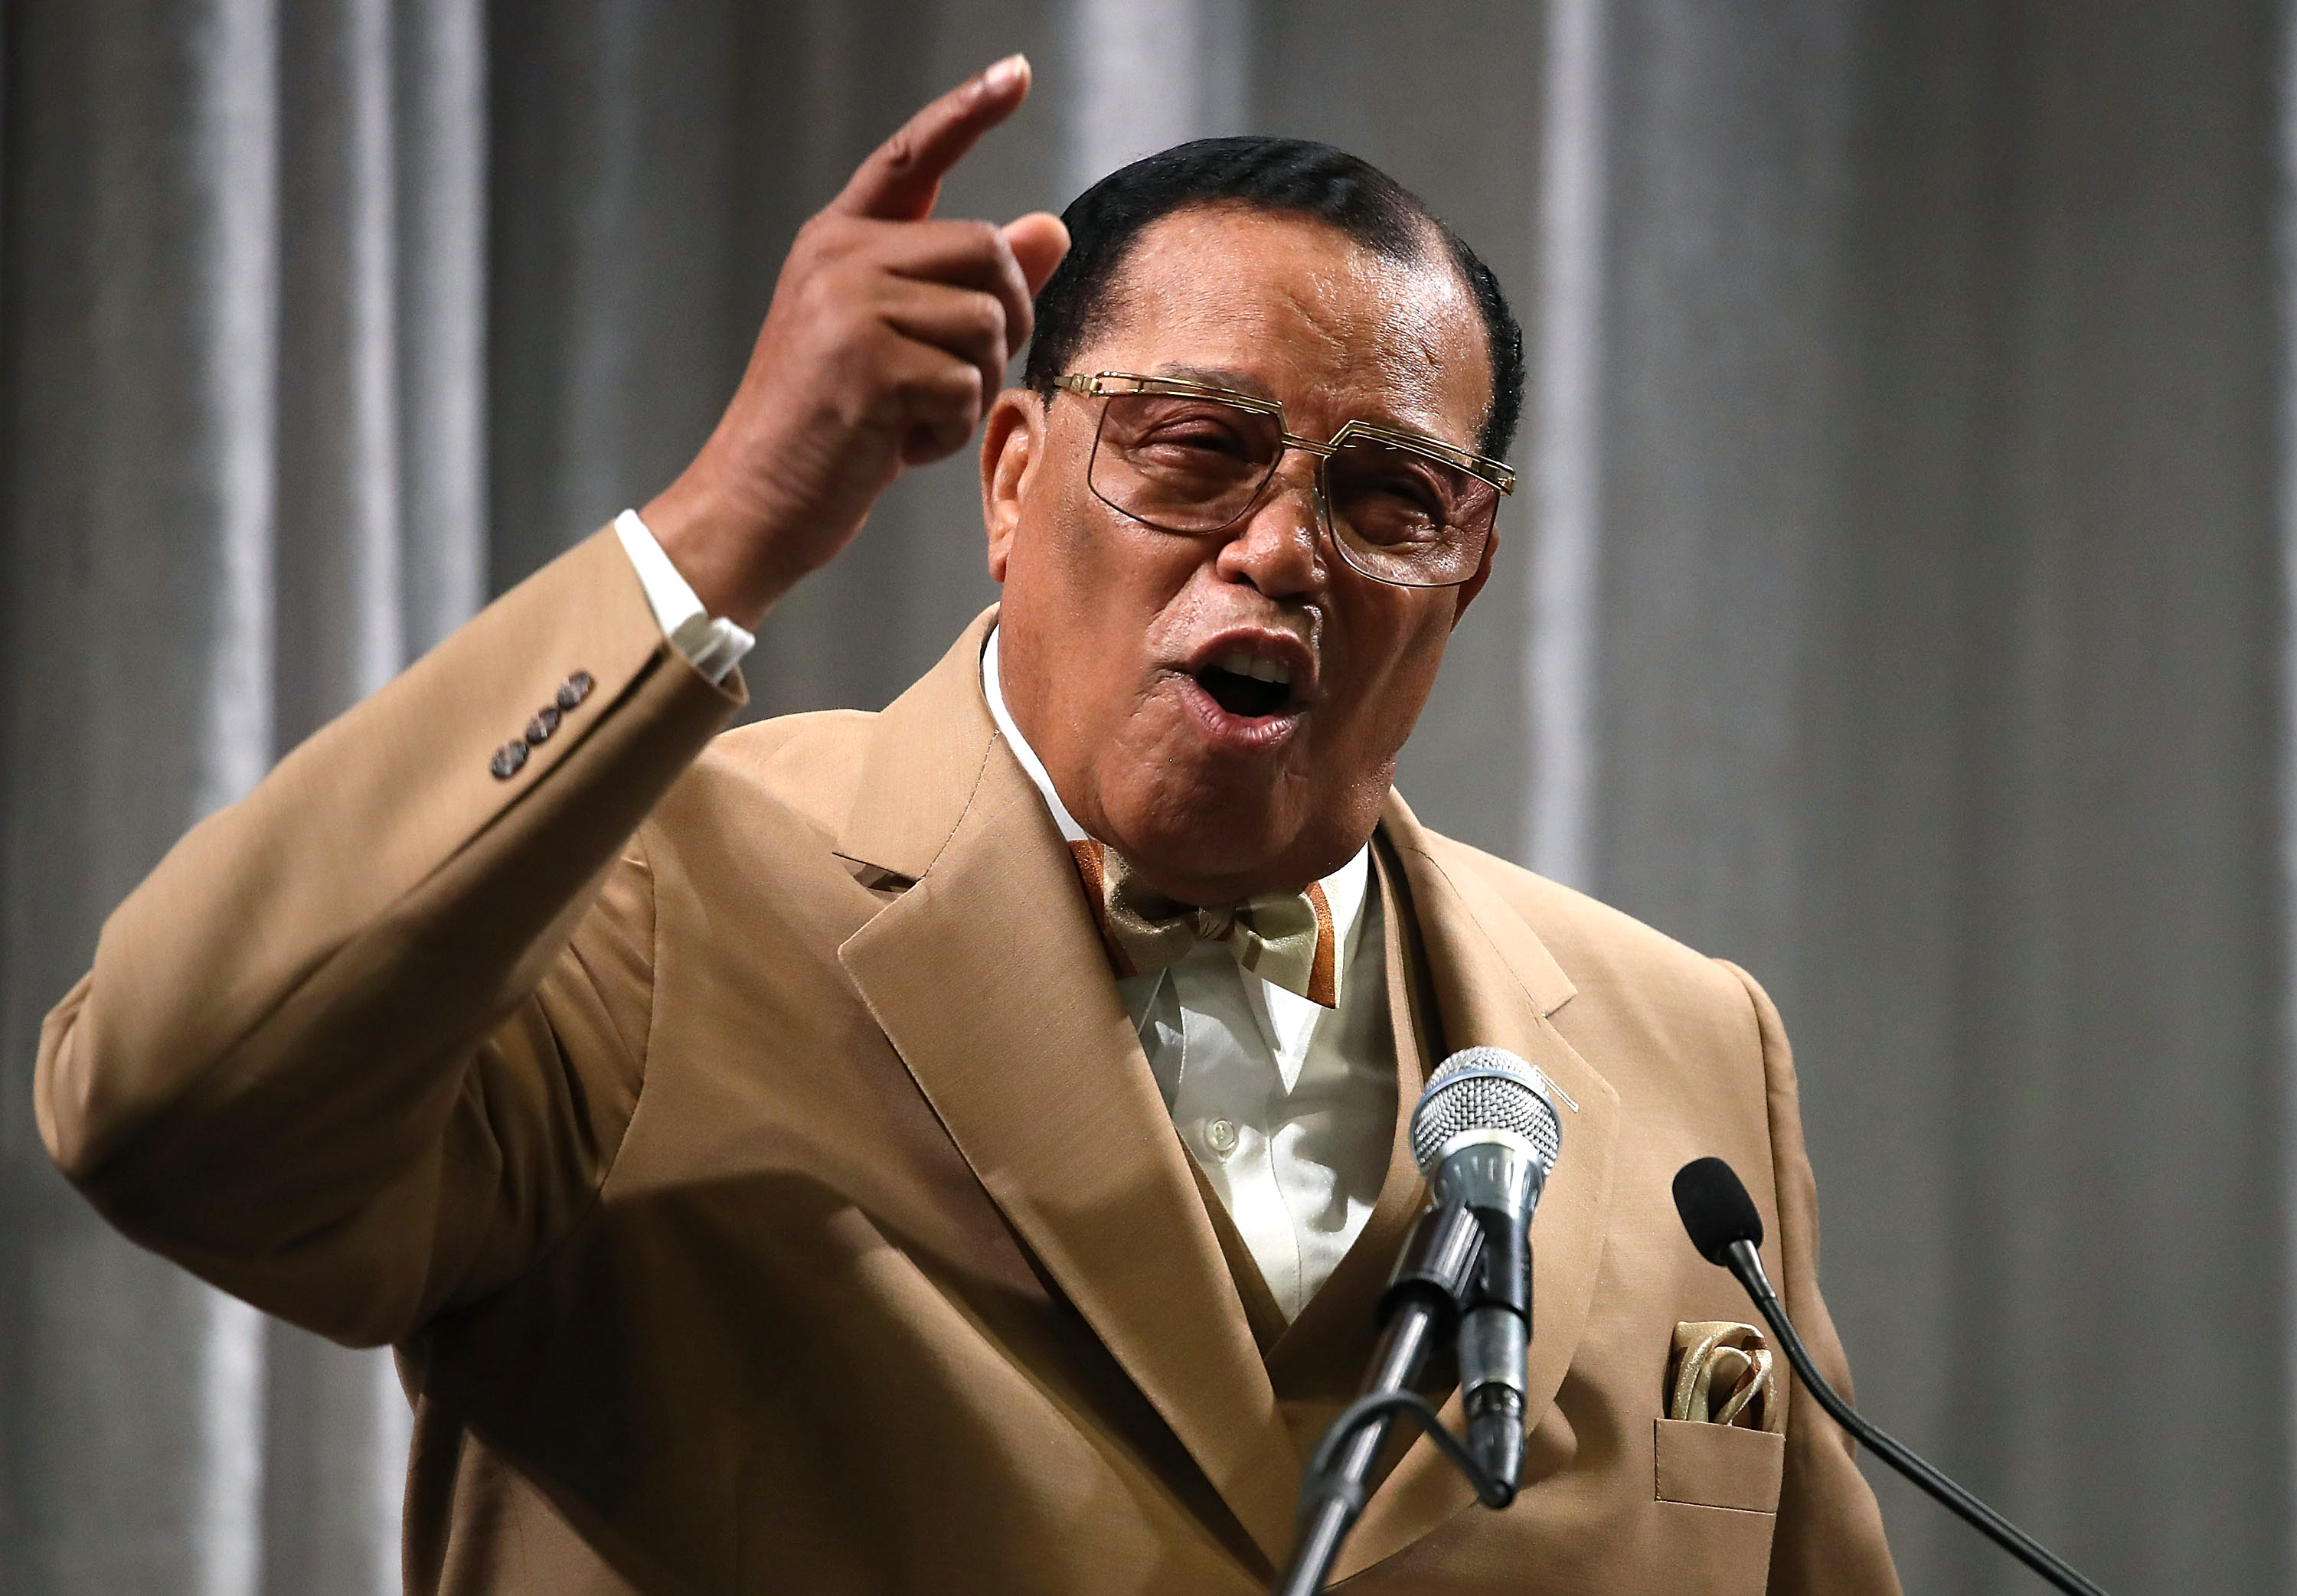 WASHINGTON, DC - NOVEMBER 16: Nation of Islam Minister Louis Farrakhan delivers a speech and talks about U.S. President Donald Trump, at the Watergate Hotel, on November 16, 2017 in Washington, DC. This is the first time that Minister Farrakhan will speak directly to the 45th President of the United States and will address "issues of importance regarding Americas domestic challenges, her place on the world stage and her future." (Photo by Mark Wilson/Getty Images)